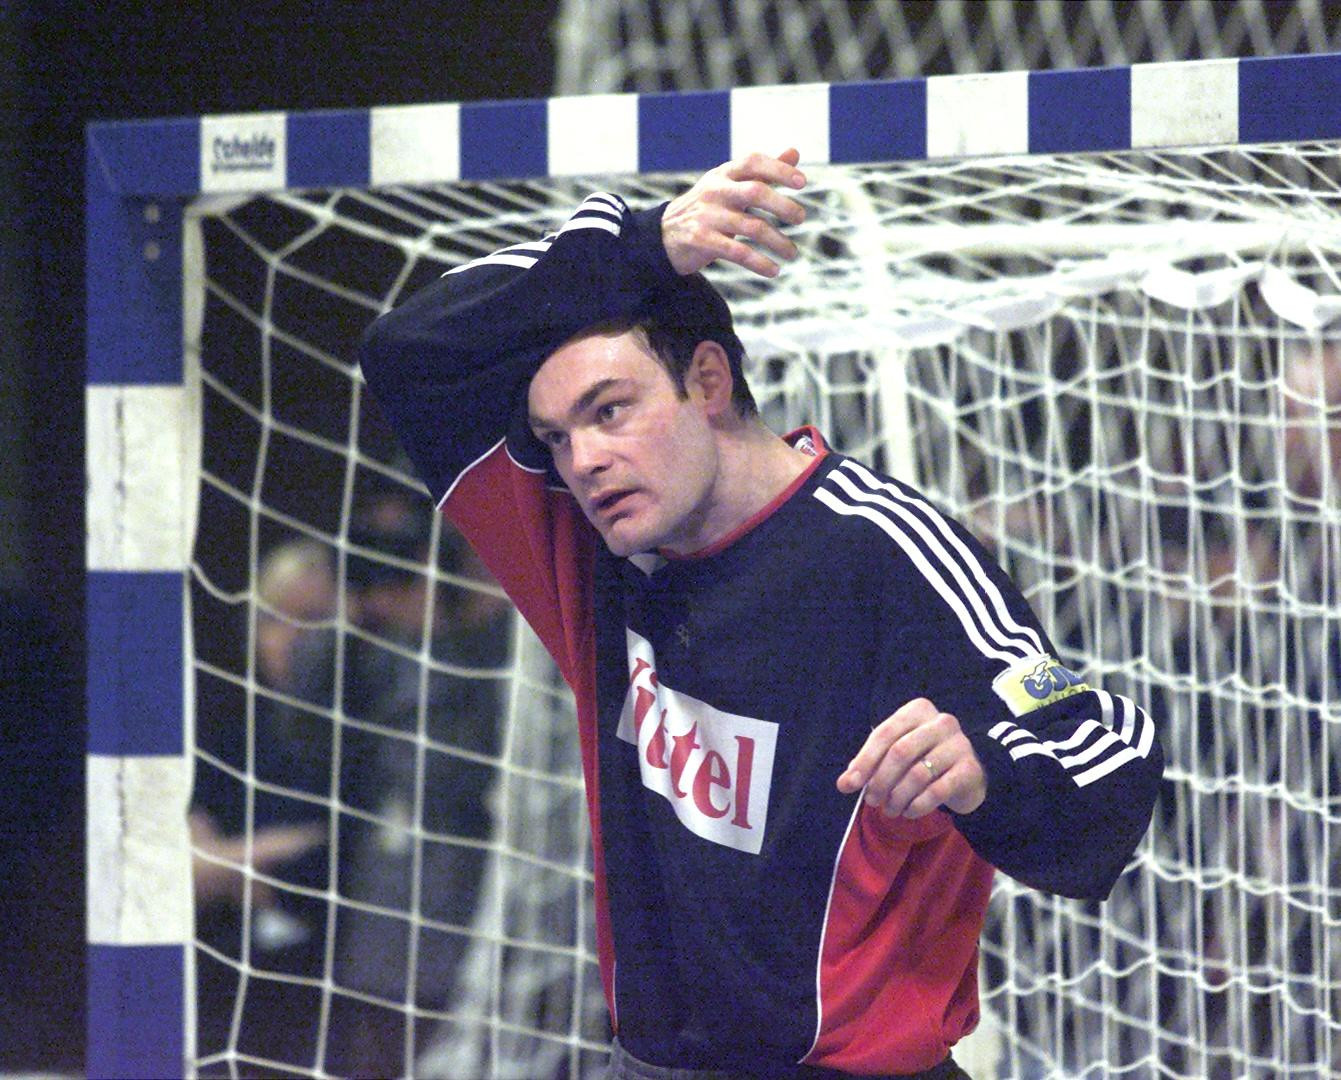 Former goalkeeper Bruno Martini played for France at two Olympic Games, and helped the country to win World Championship golds in 1995 and 2001 ©Getty Images